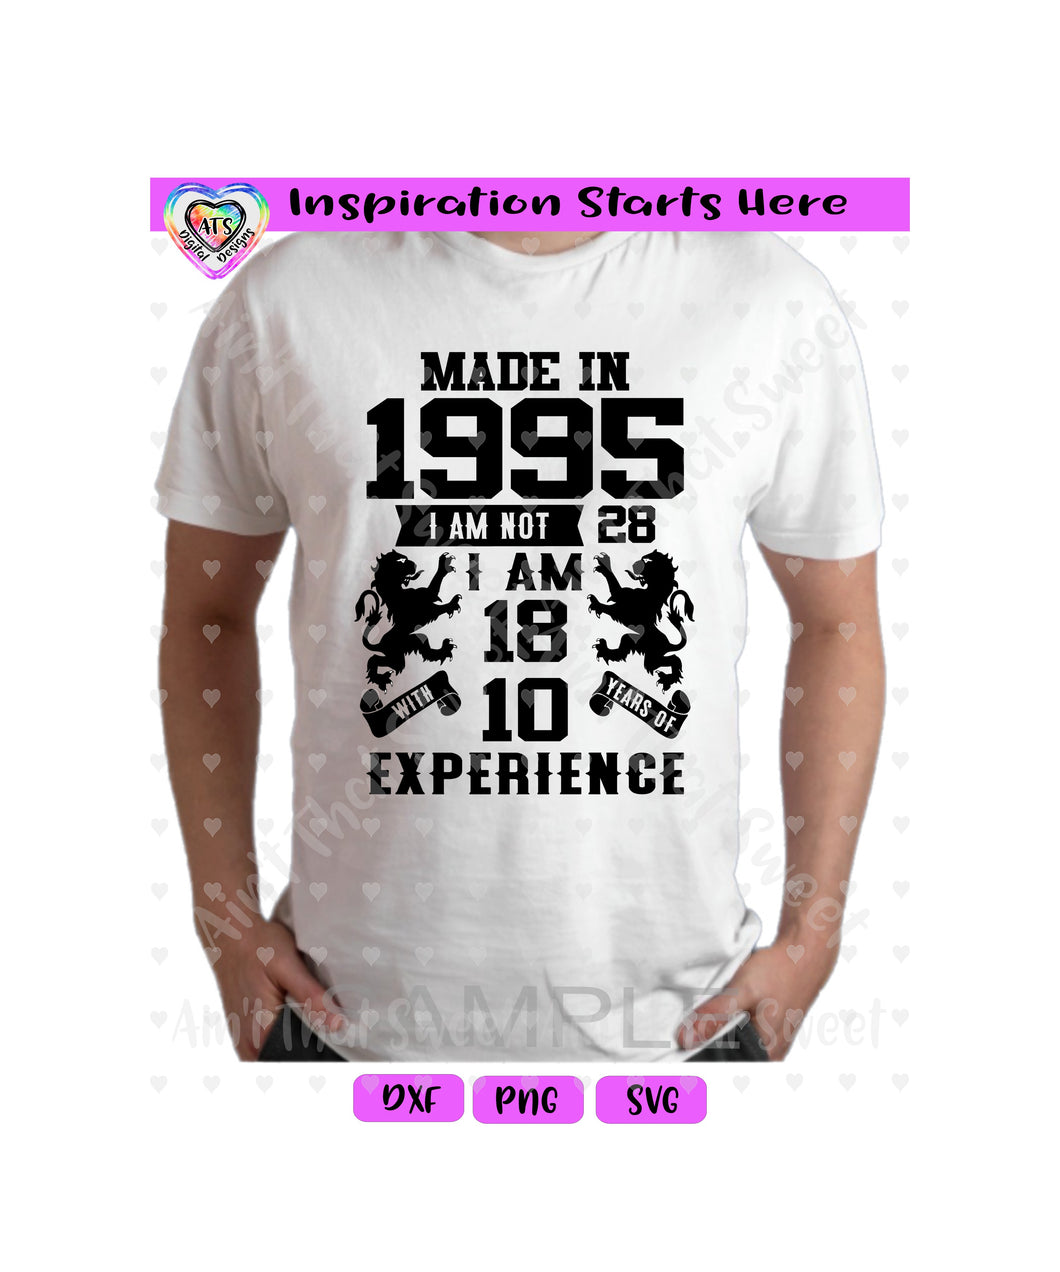 Made in 1995 | I am not 28 I am 18 With 10 Years Experience | Banners | Lions | Scrolls  (Based on 2023) - Transparent PNG, SVG, DXF  - Silhouette, Cricut, Scan N Cut